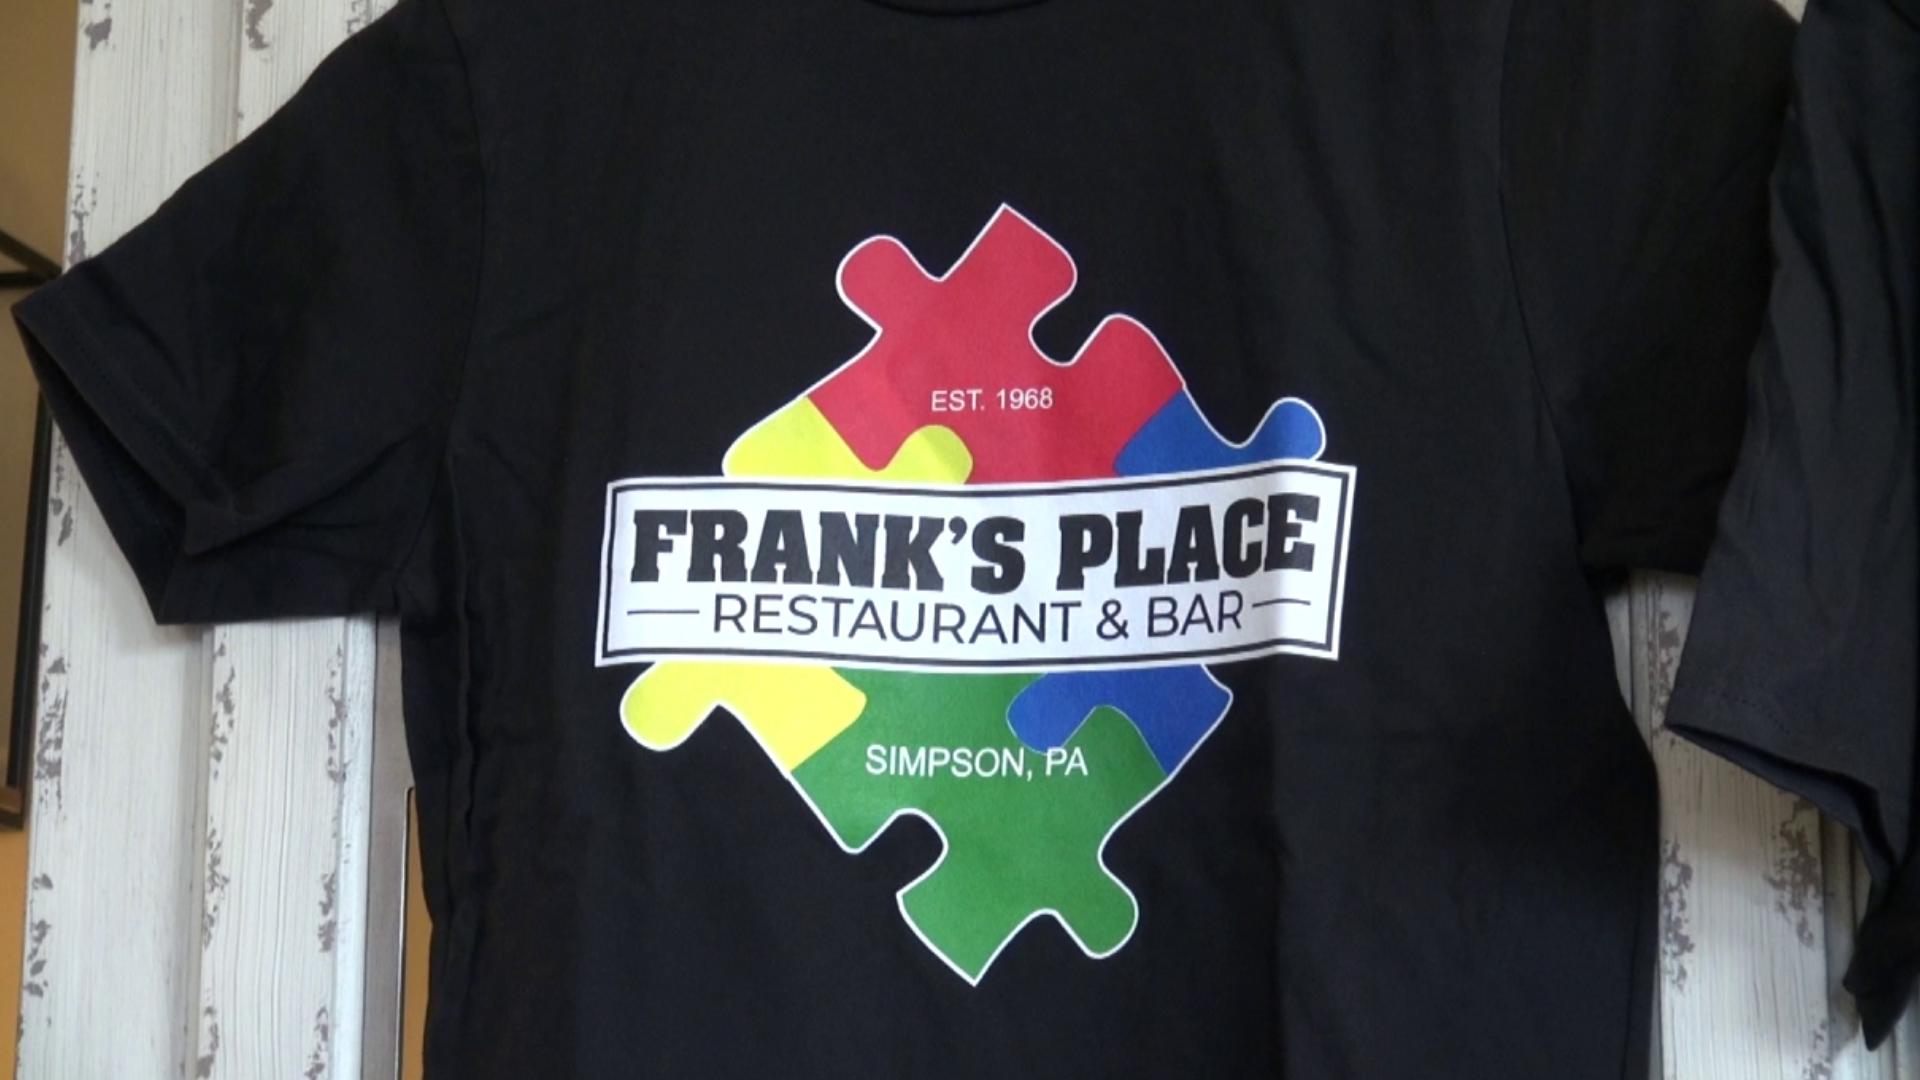 The owners of Frank's Place honor Autism Acceptance Month all year round, not just in April.